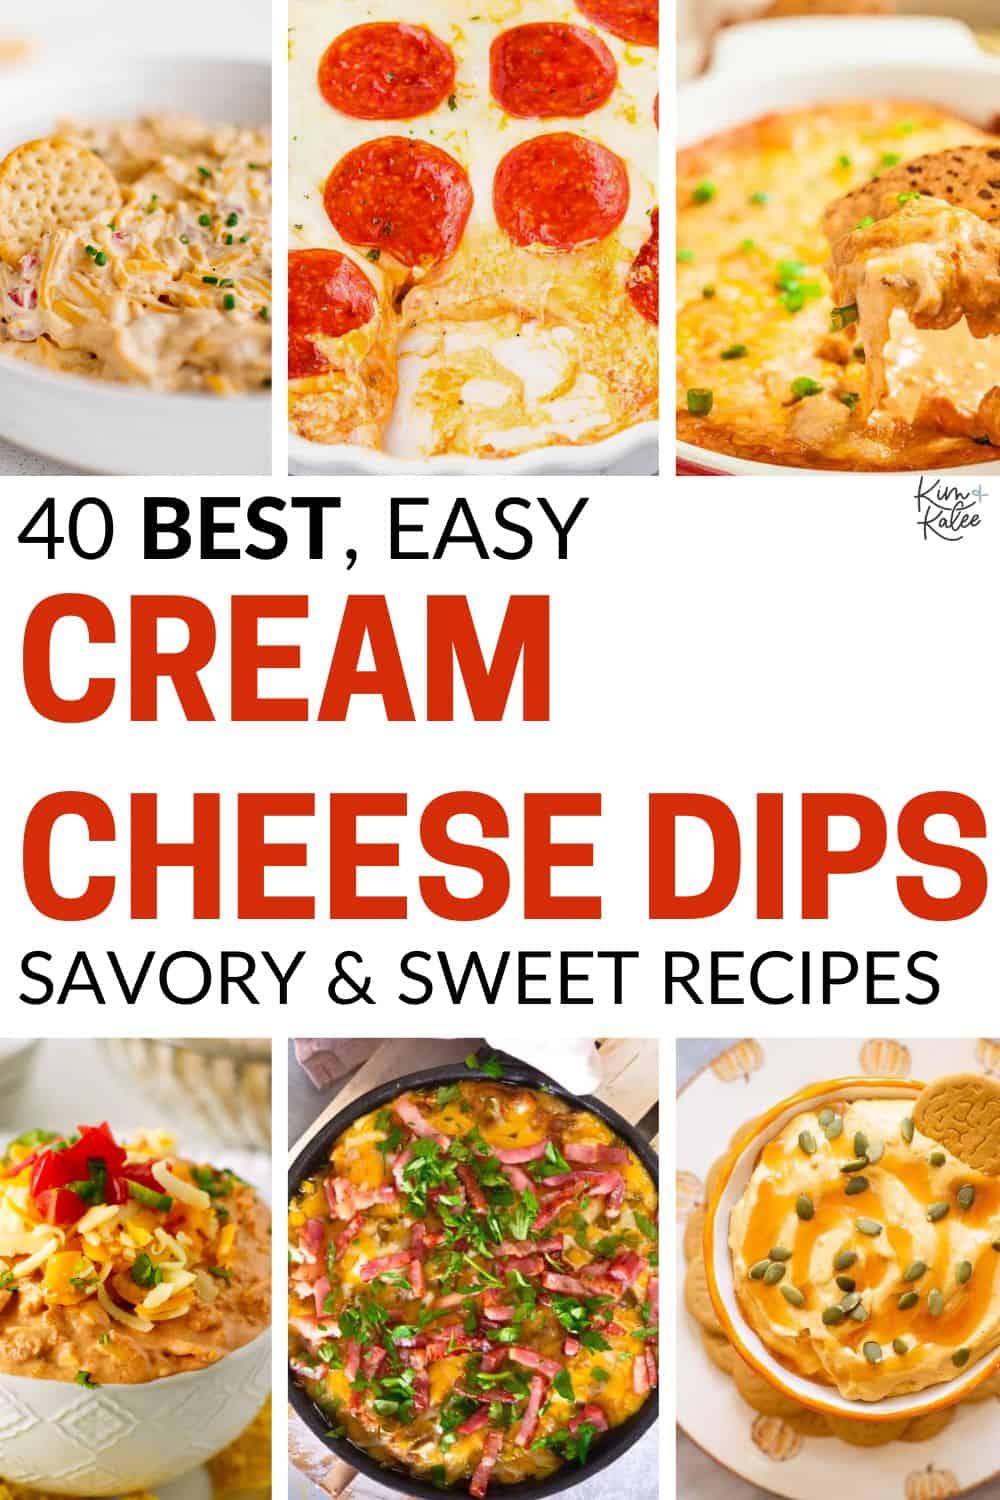 collage of 6 different dips - text overlay in the middle says 40 best, easy cream cheese dips savory and sweet recipes